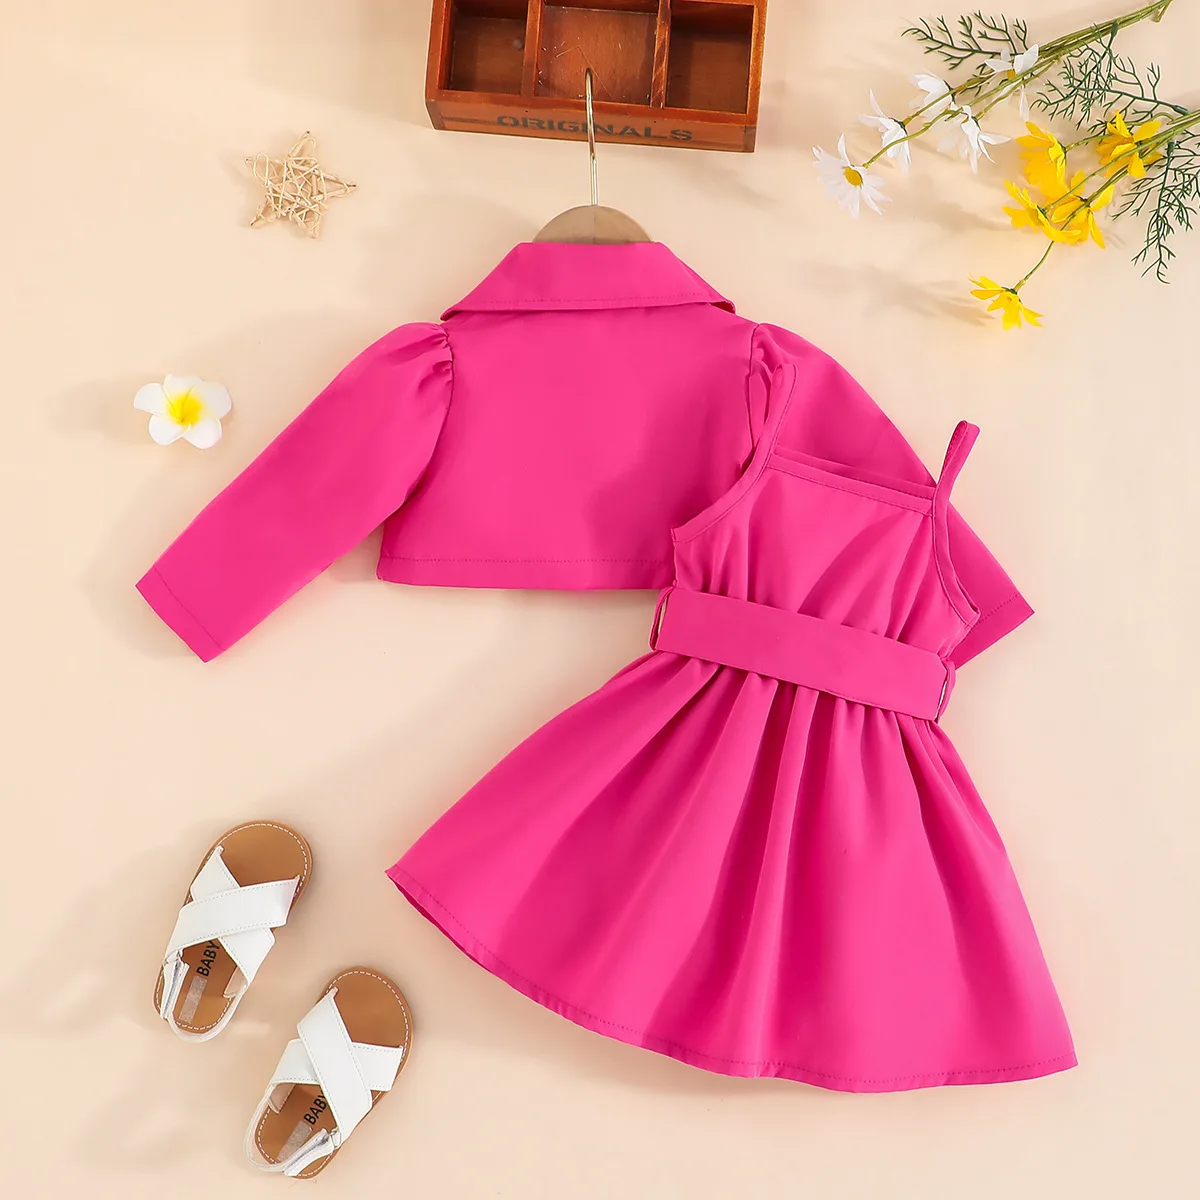 2023 new arrival toddler girls clothing sets sleeveless one-piece girls dresses+lapel coat solid children outfits clothes